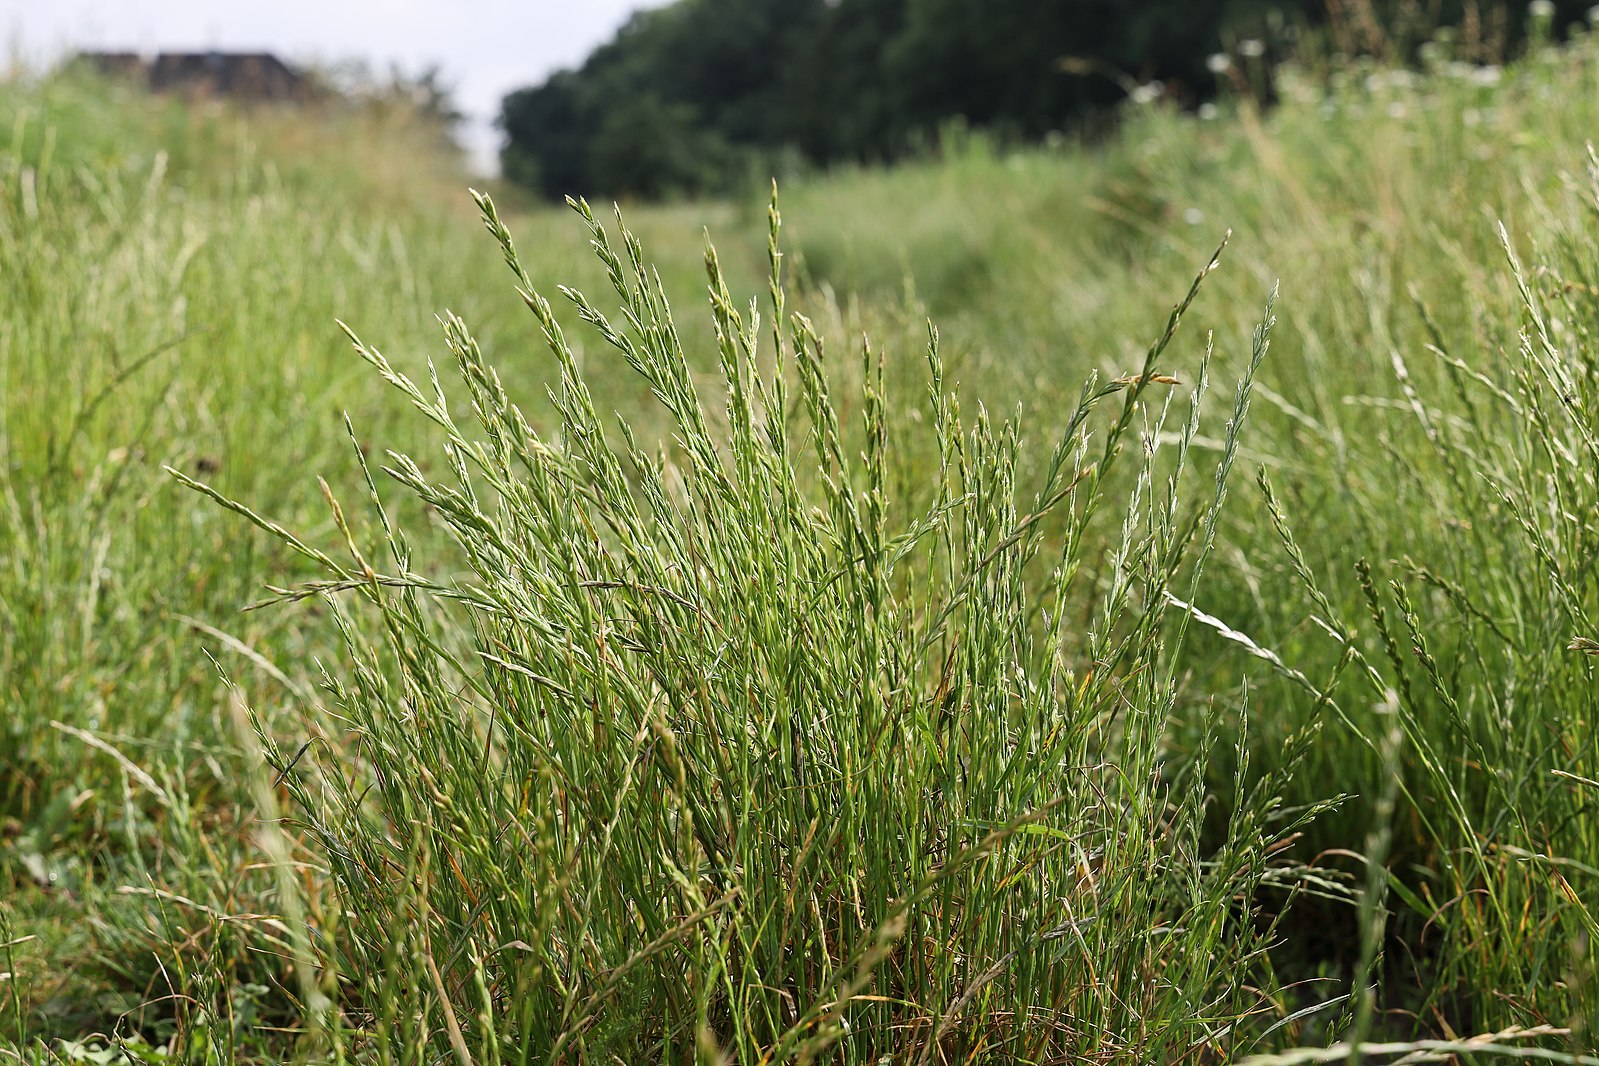 Photograph showing a close-up of perennial ryegrass (Lolium perenne) in a field.